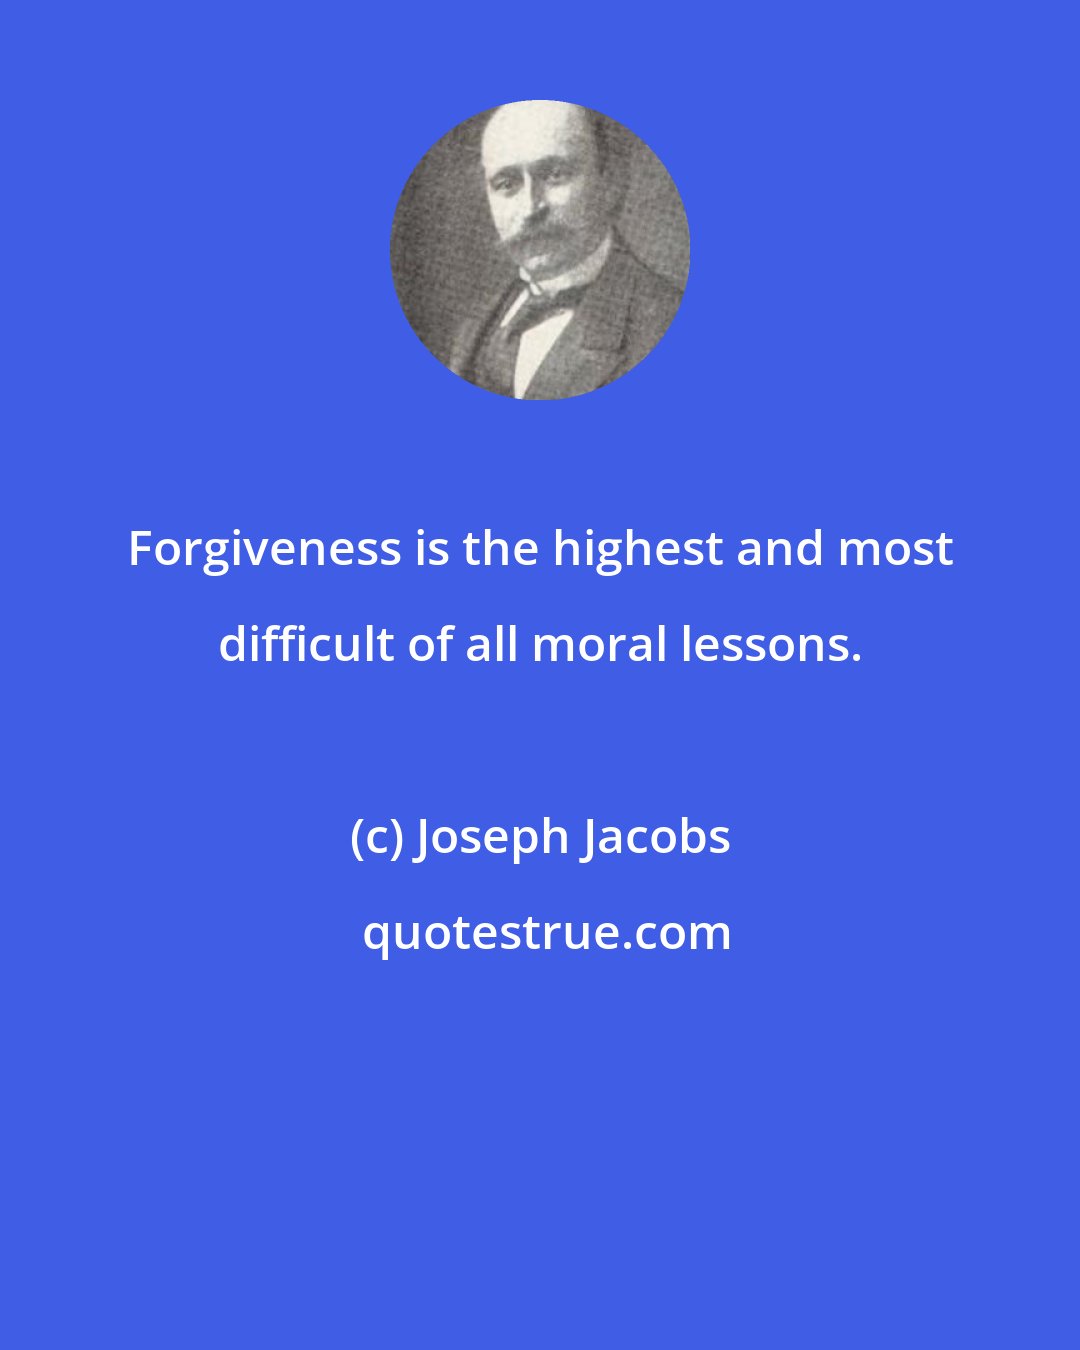 Joseph Jacobs: Forgiveness is the highest and most difficult of all moral lessons.